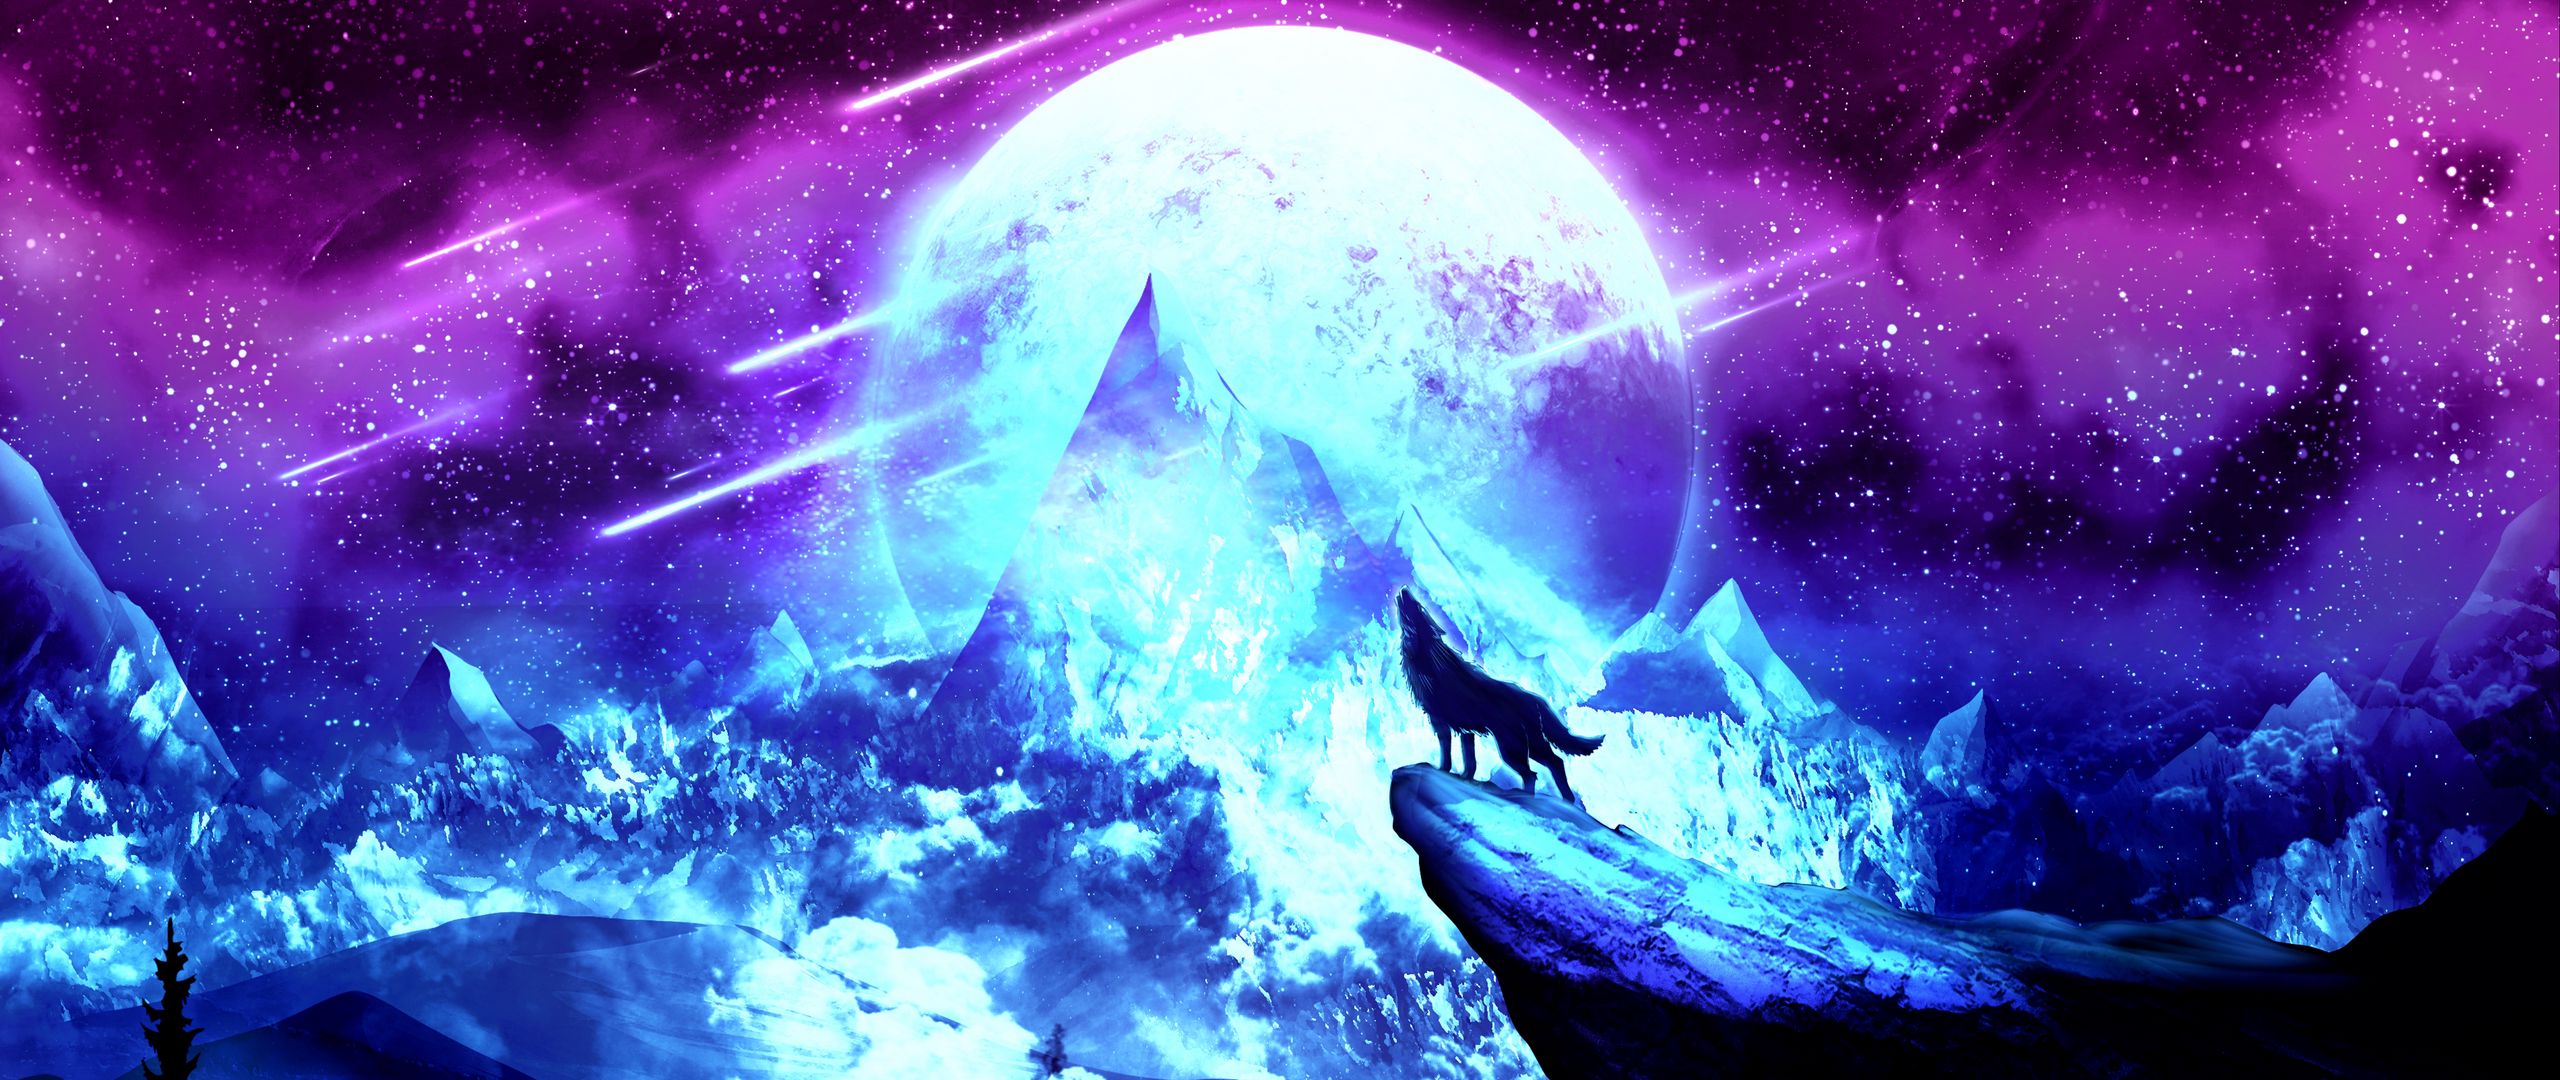 Download wallpaper 2560x1080 wolf, moon, night, mountains, art dual wide  1080p hd background